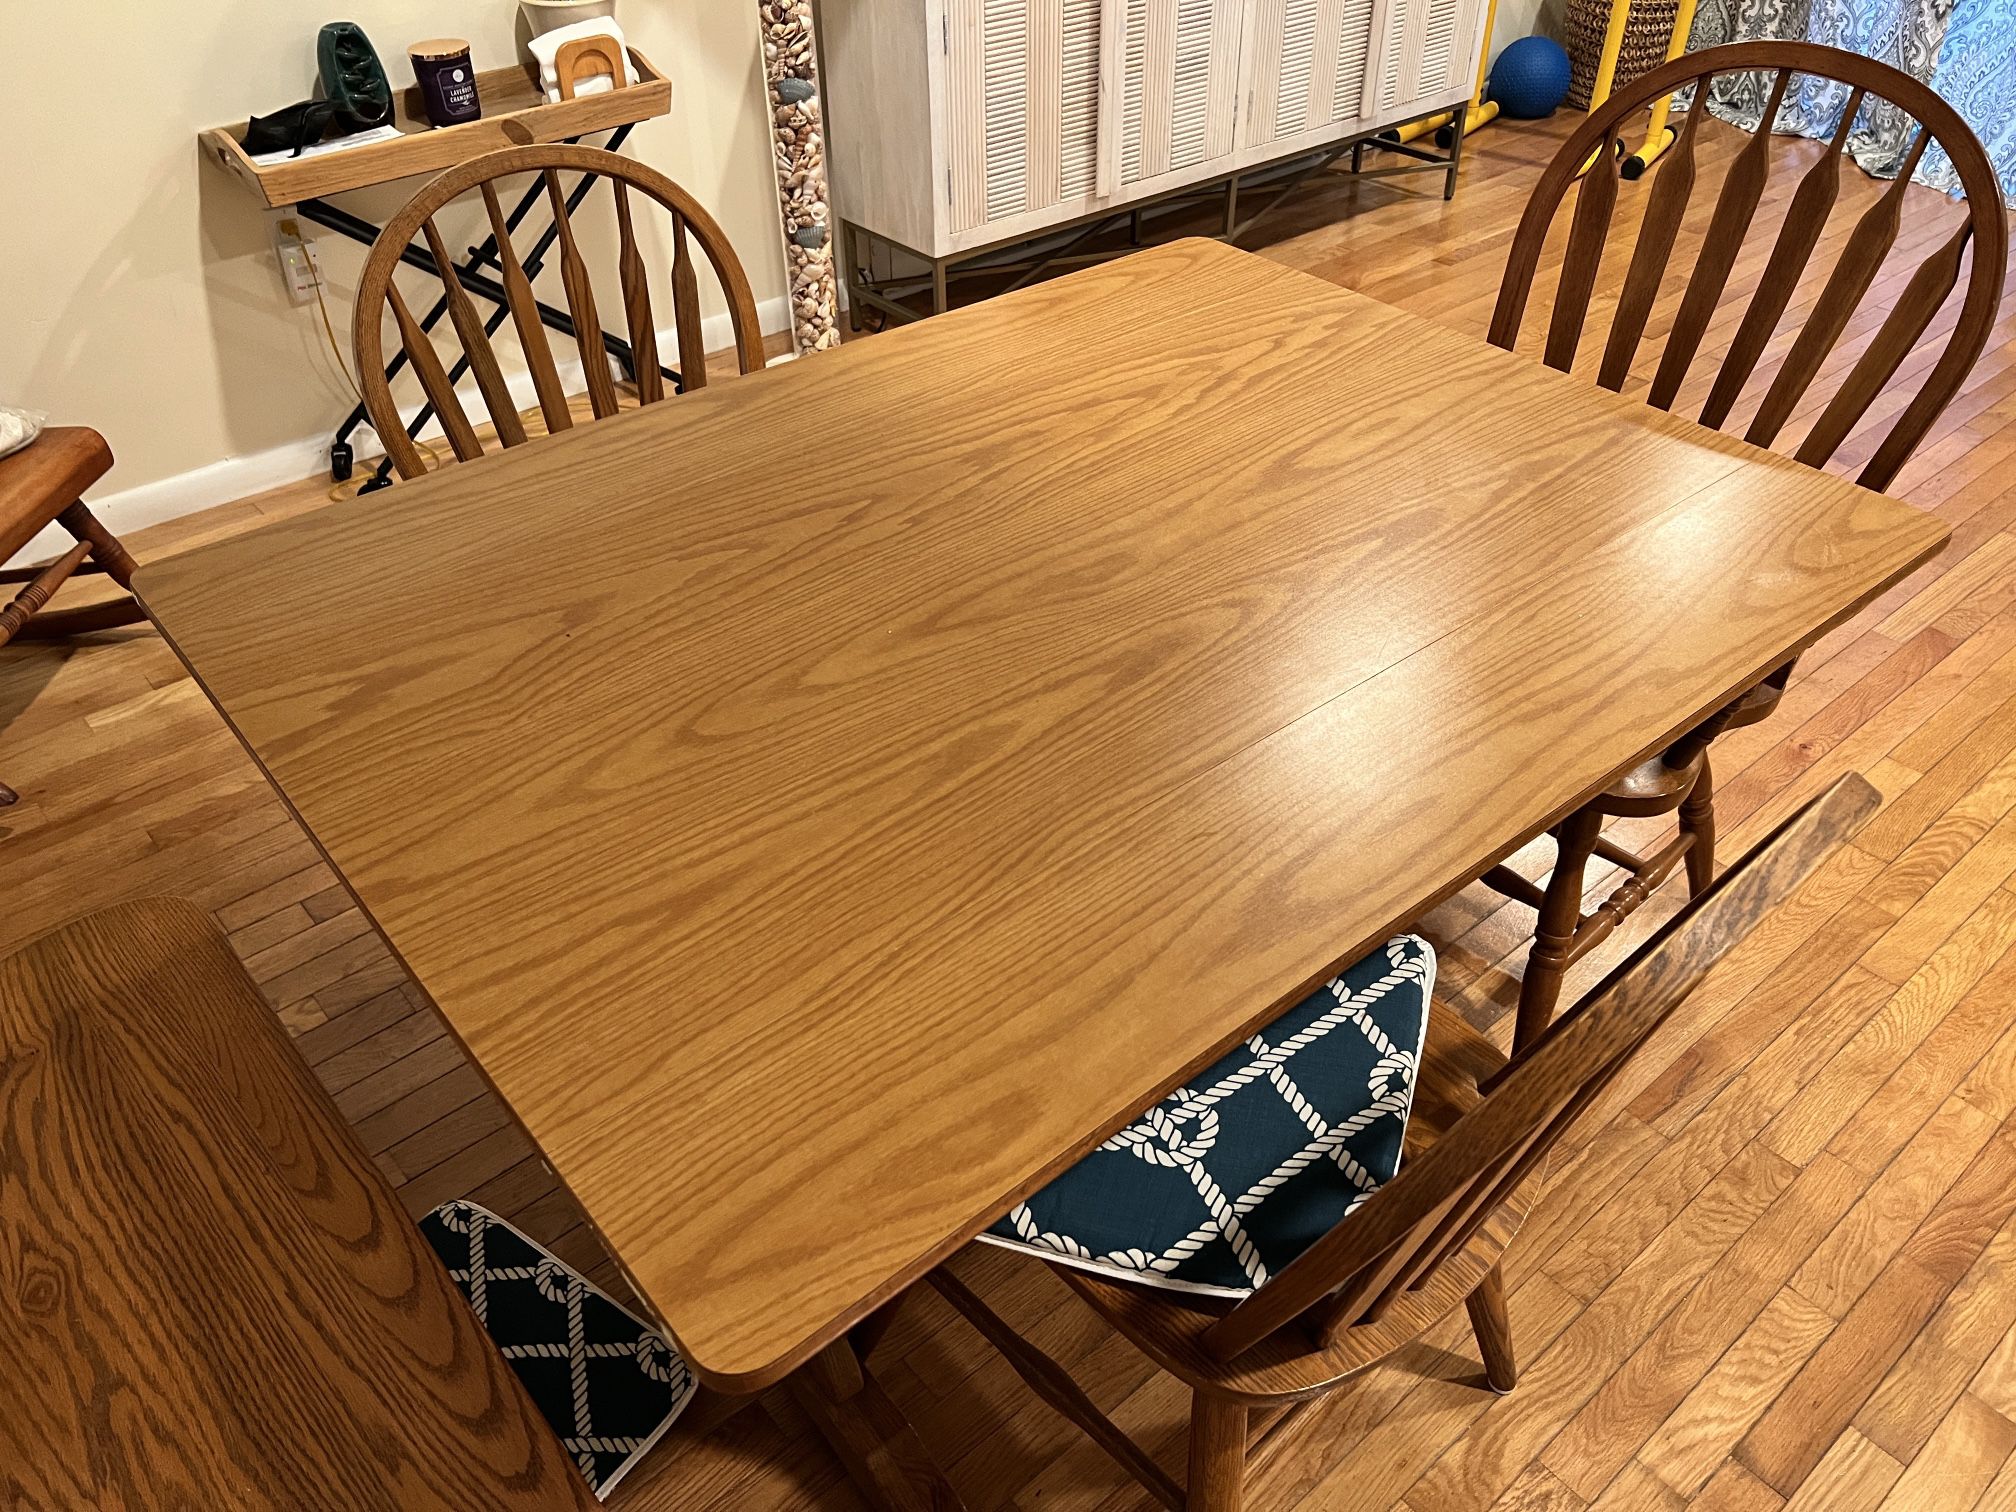 Kitchen / Dining Room Table For Sale - Real Wood!